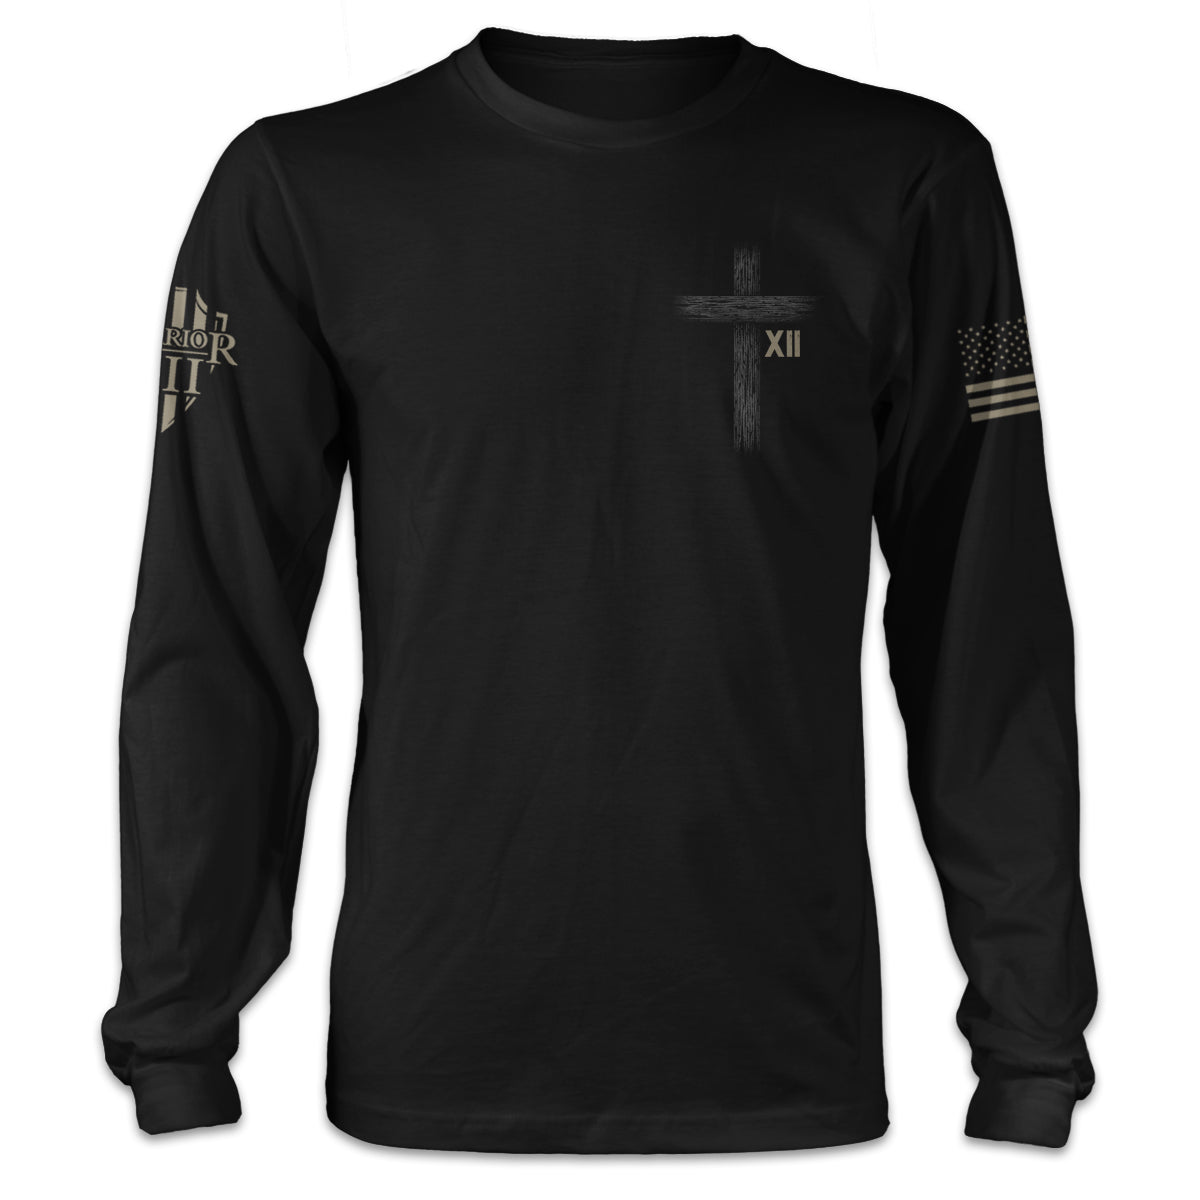 A black All Lives Matter long sleeve shirt with a cross printed on the front.